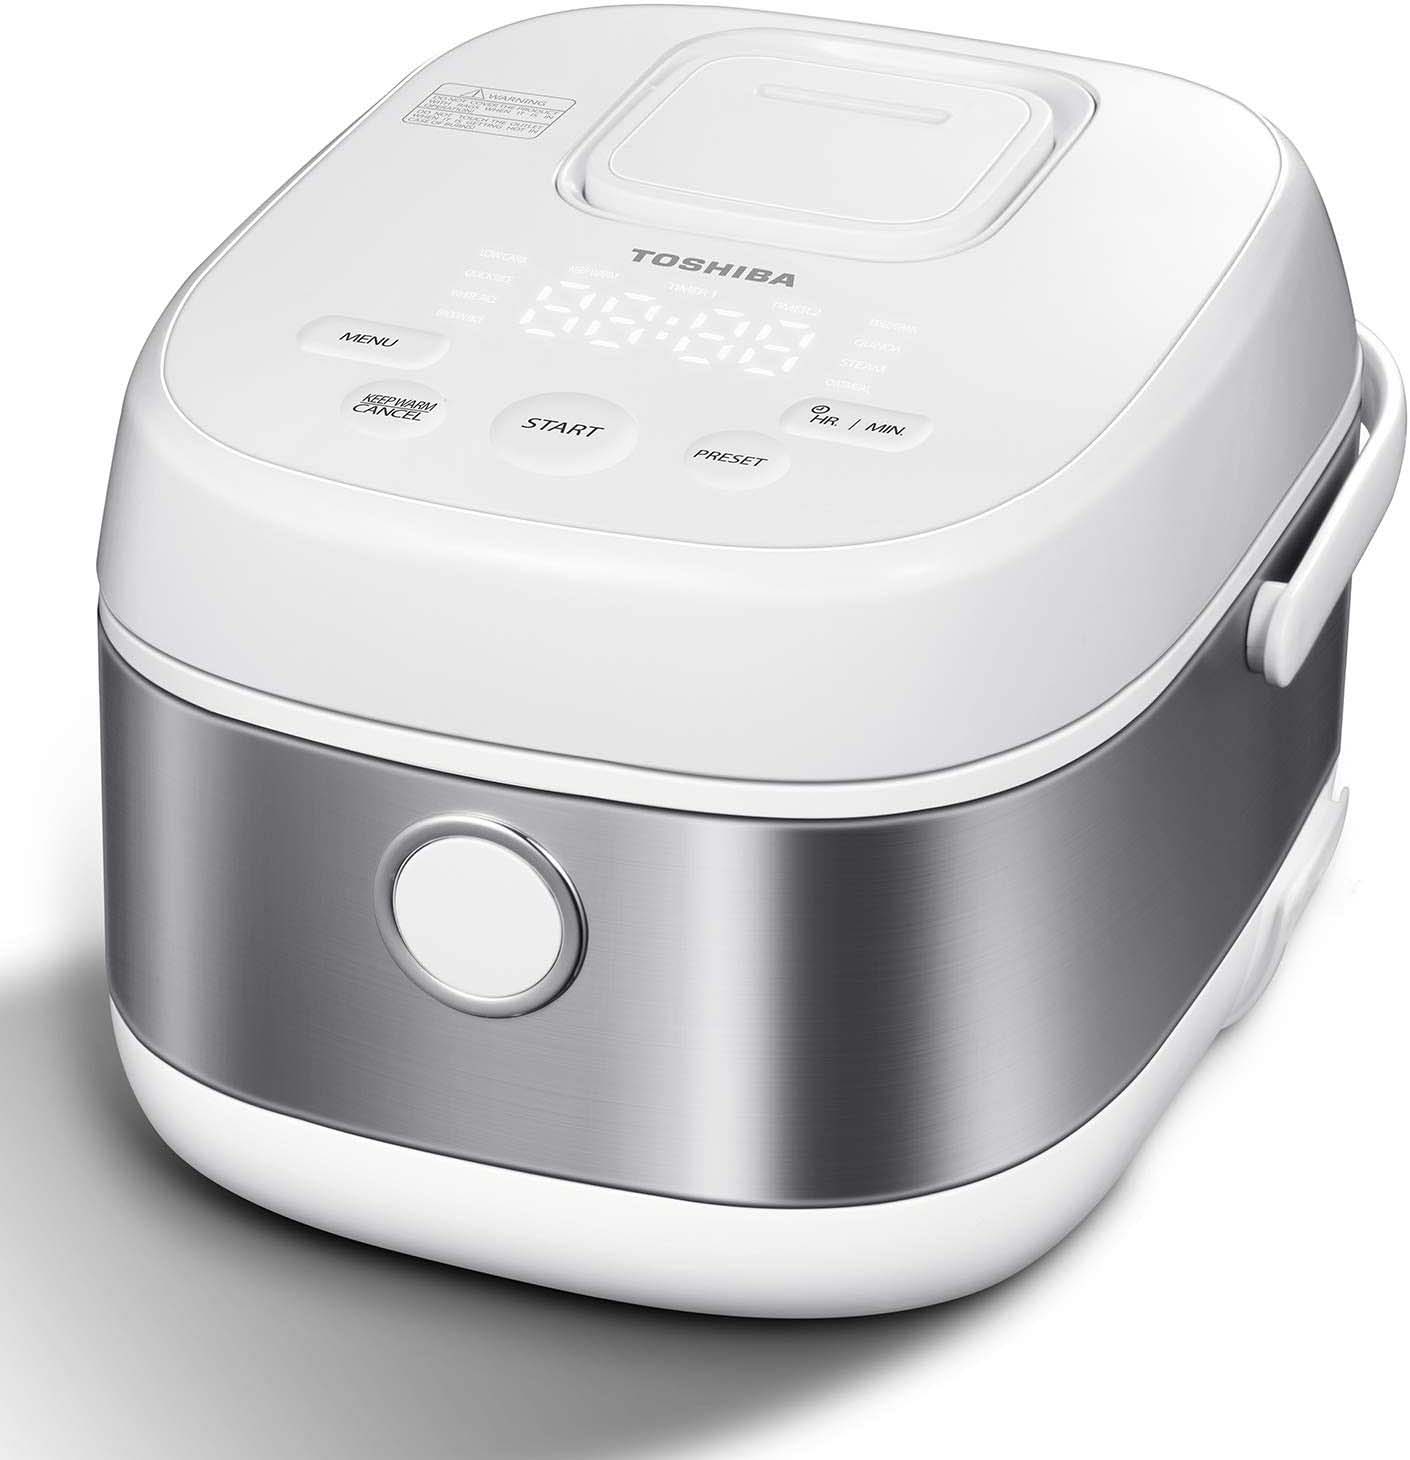 Toshiba Low Carb Digital Programmable Multi-functional Rice Cooker